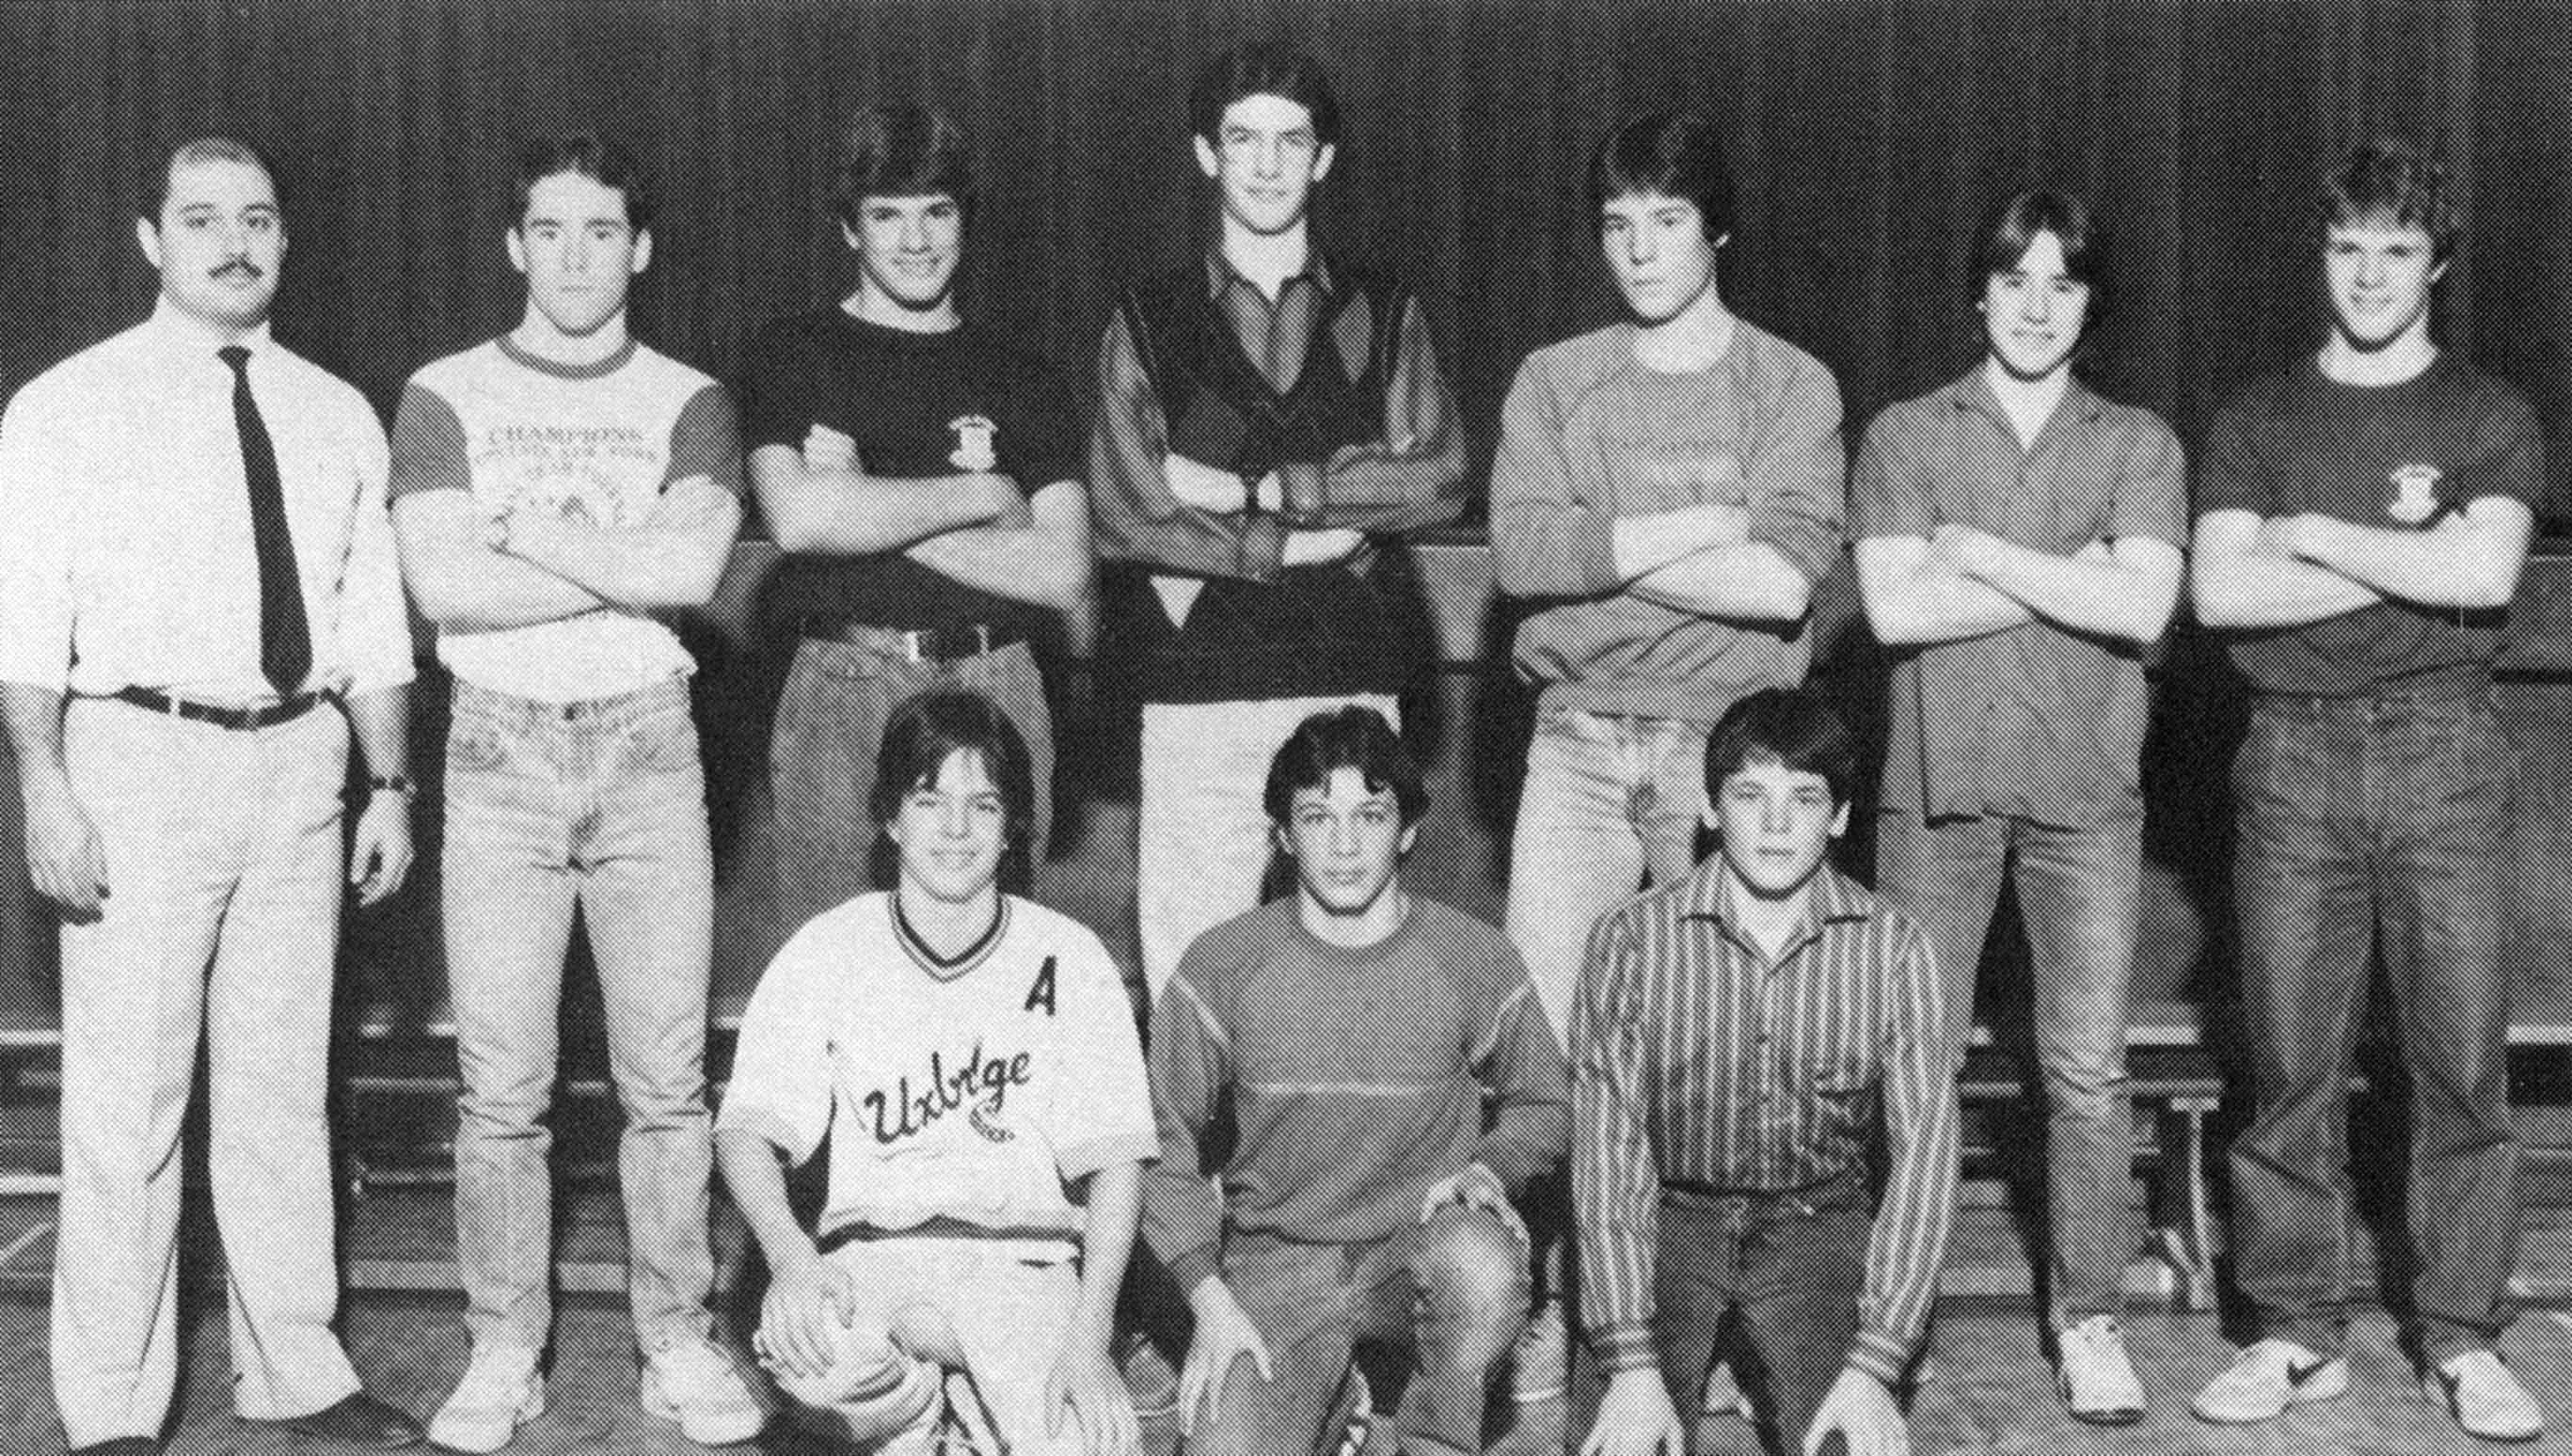 (Click to magnify) FRONT ROW: John Humphries, Richard Zaal, Mike Hales; ***BACK ROW: Mr. L. Vavougious, Keith Olivella, Mike Klose, Neil Brooks, Colin Hales, Mark Ferraro, Paul Klose.